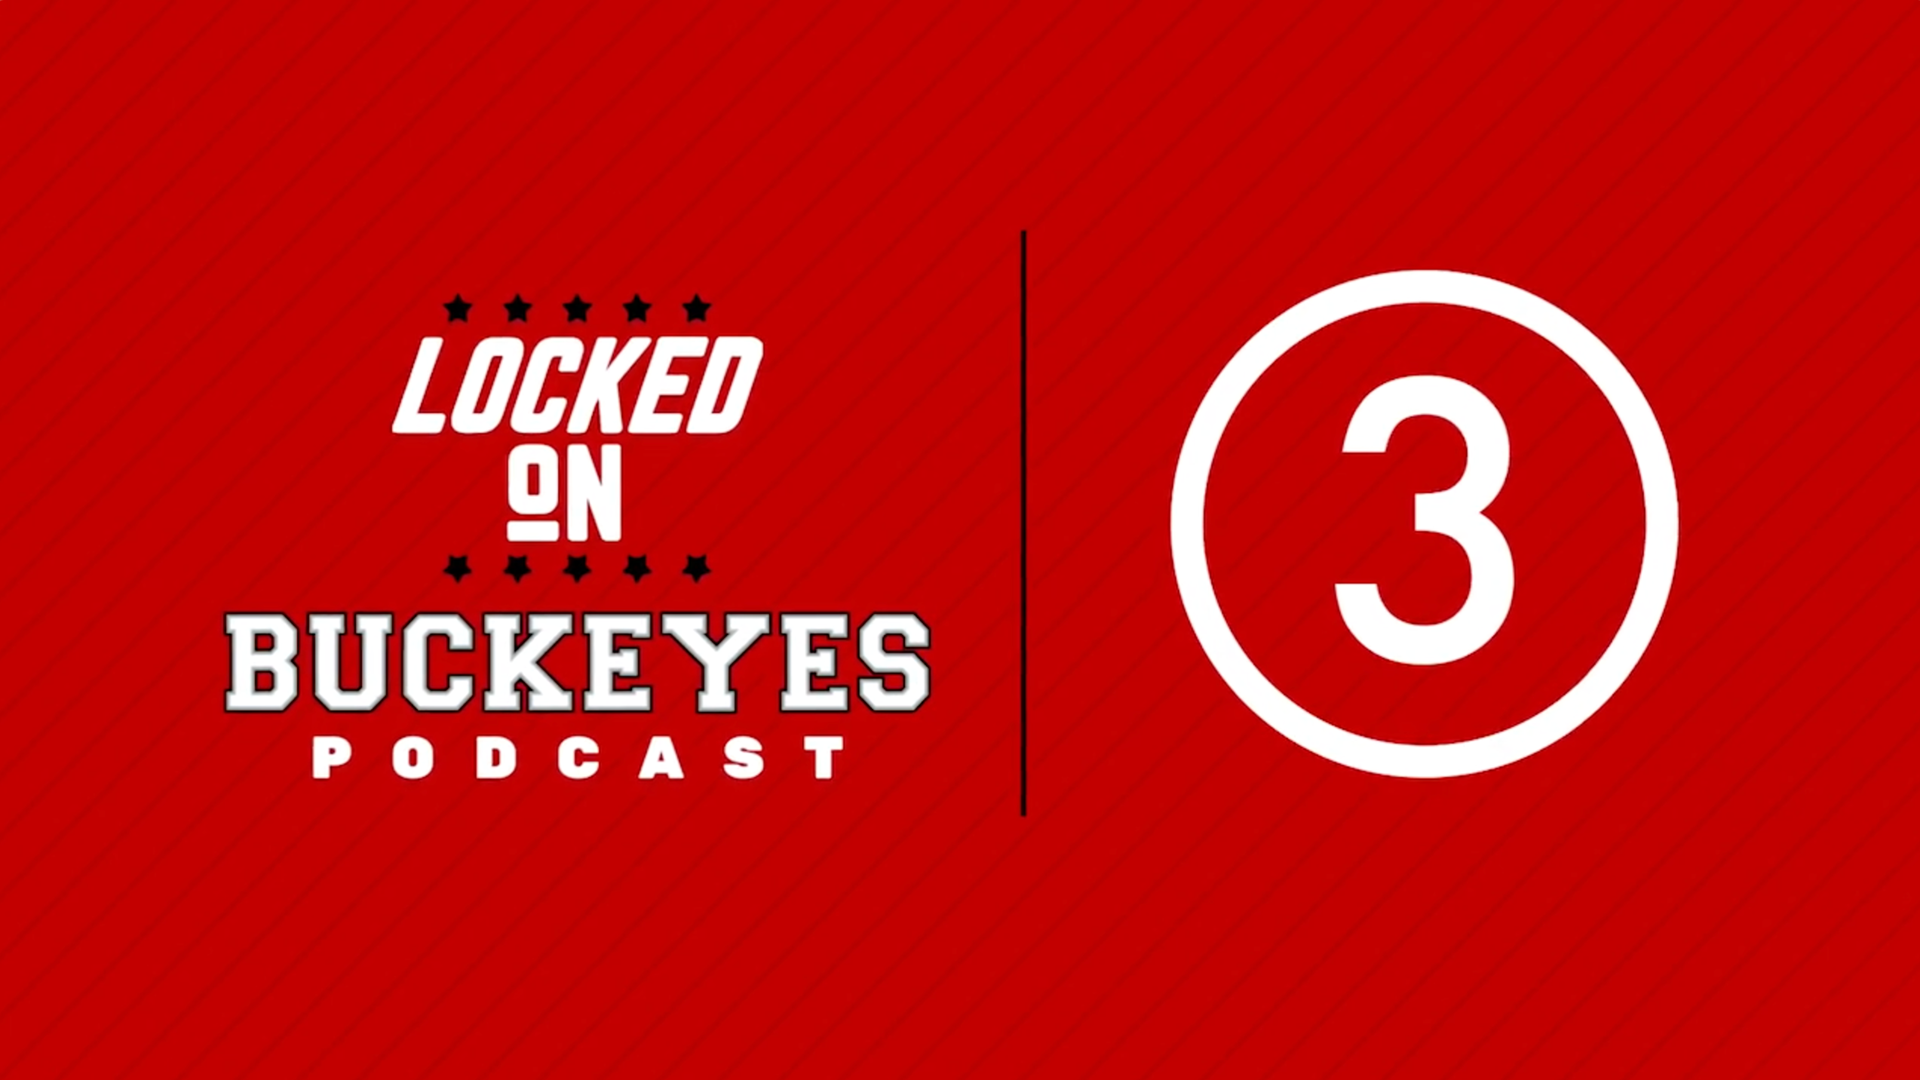 Locked On Buckeyes' Jay Stephens examines what Ohio State needs to do to get back on track from its three-game losing streak.